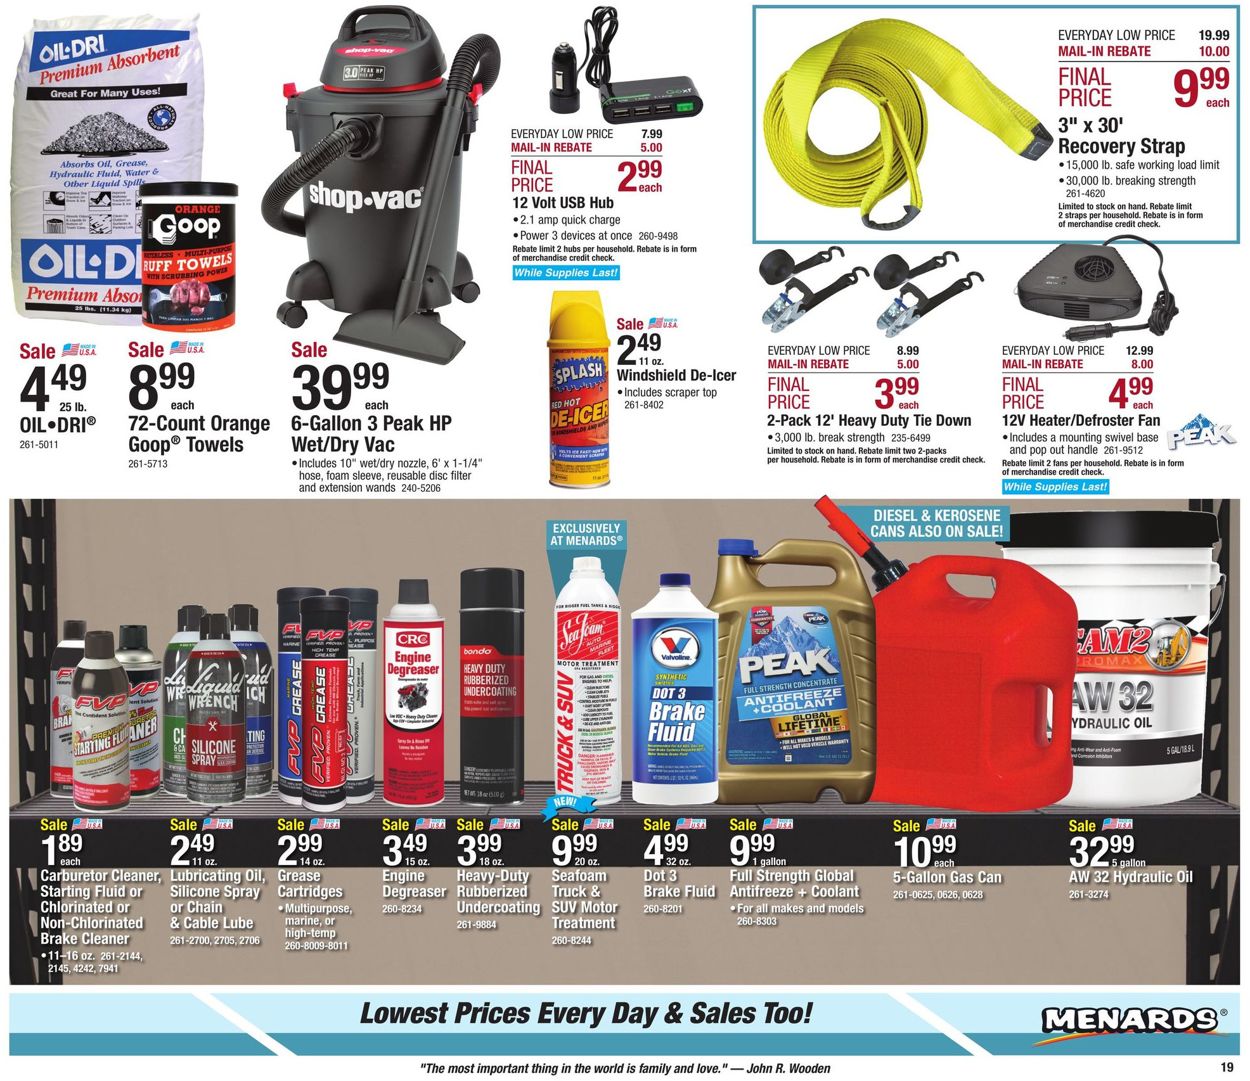 Menards - New Year&#39;s Ad 2019/2020 Current weekly ad 12/22 - 01/04/2020 [23] - www.semashow.com